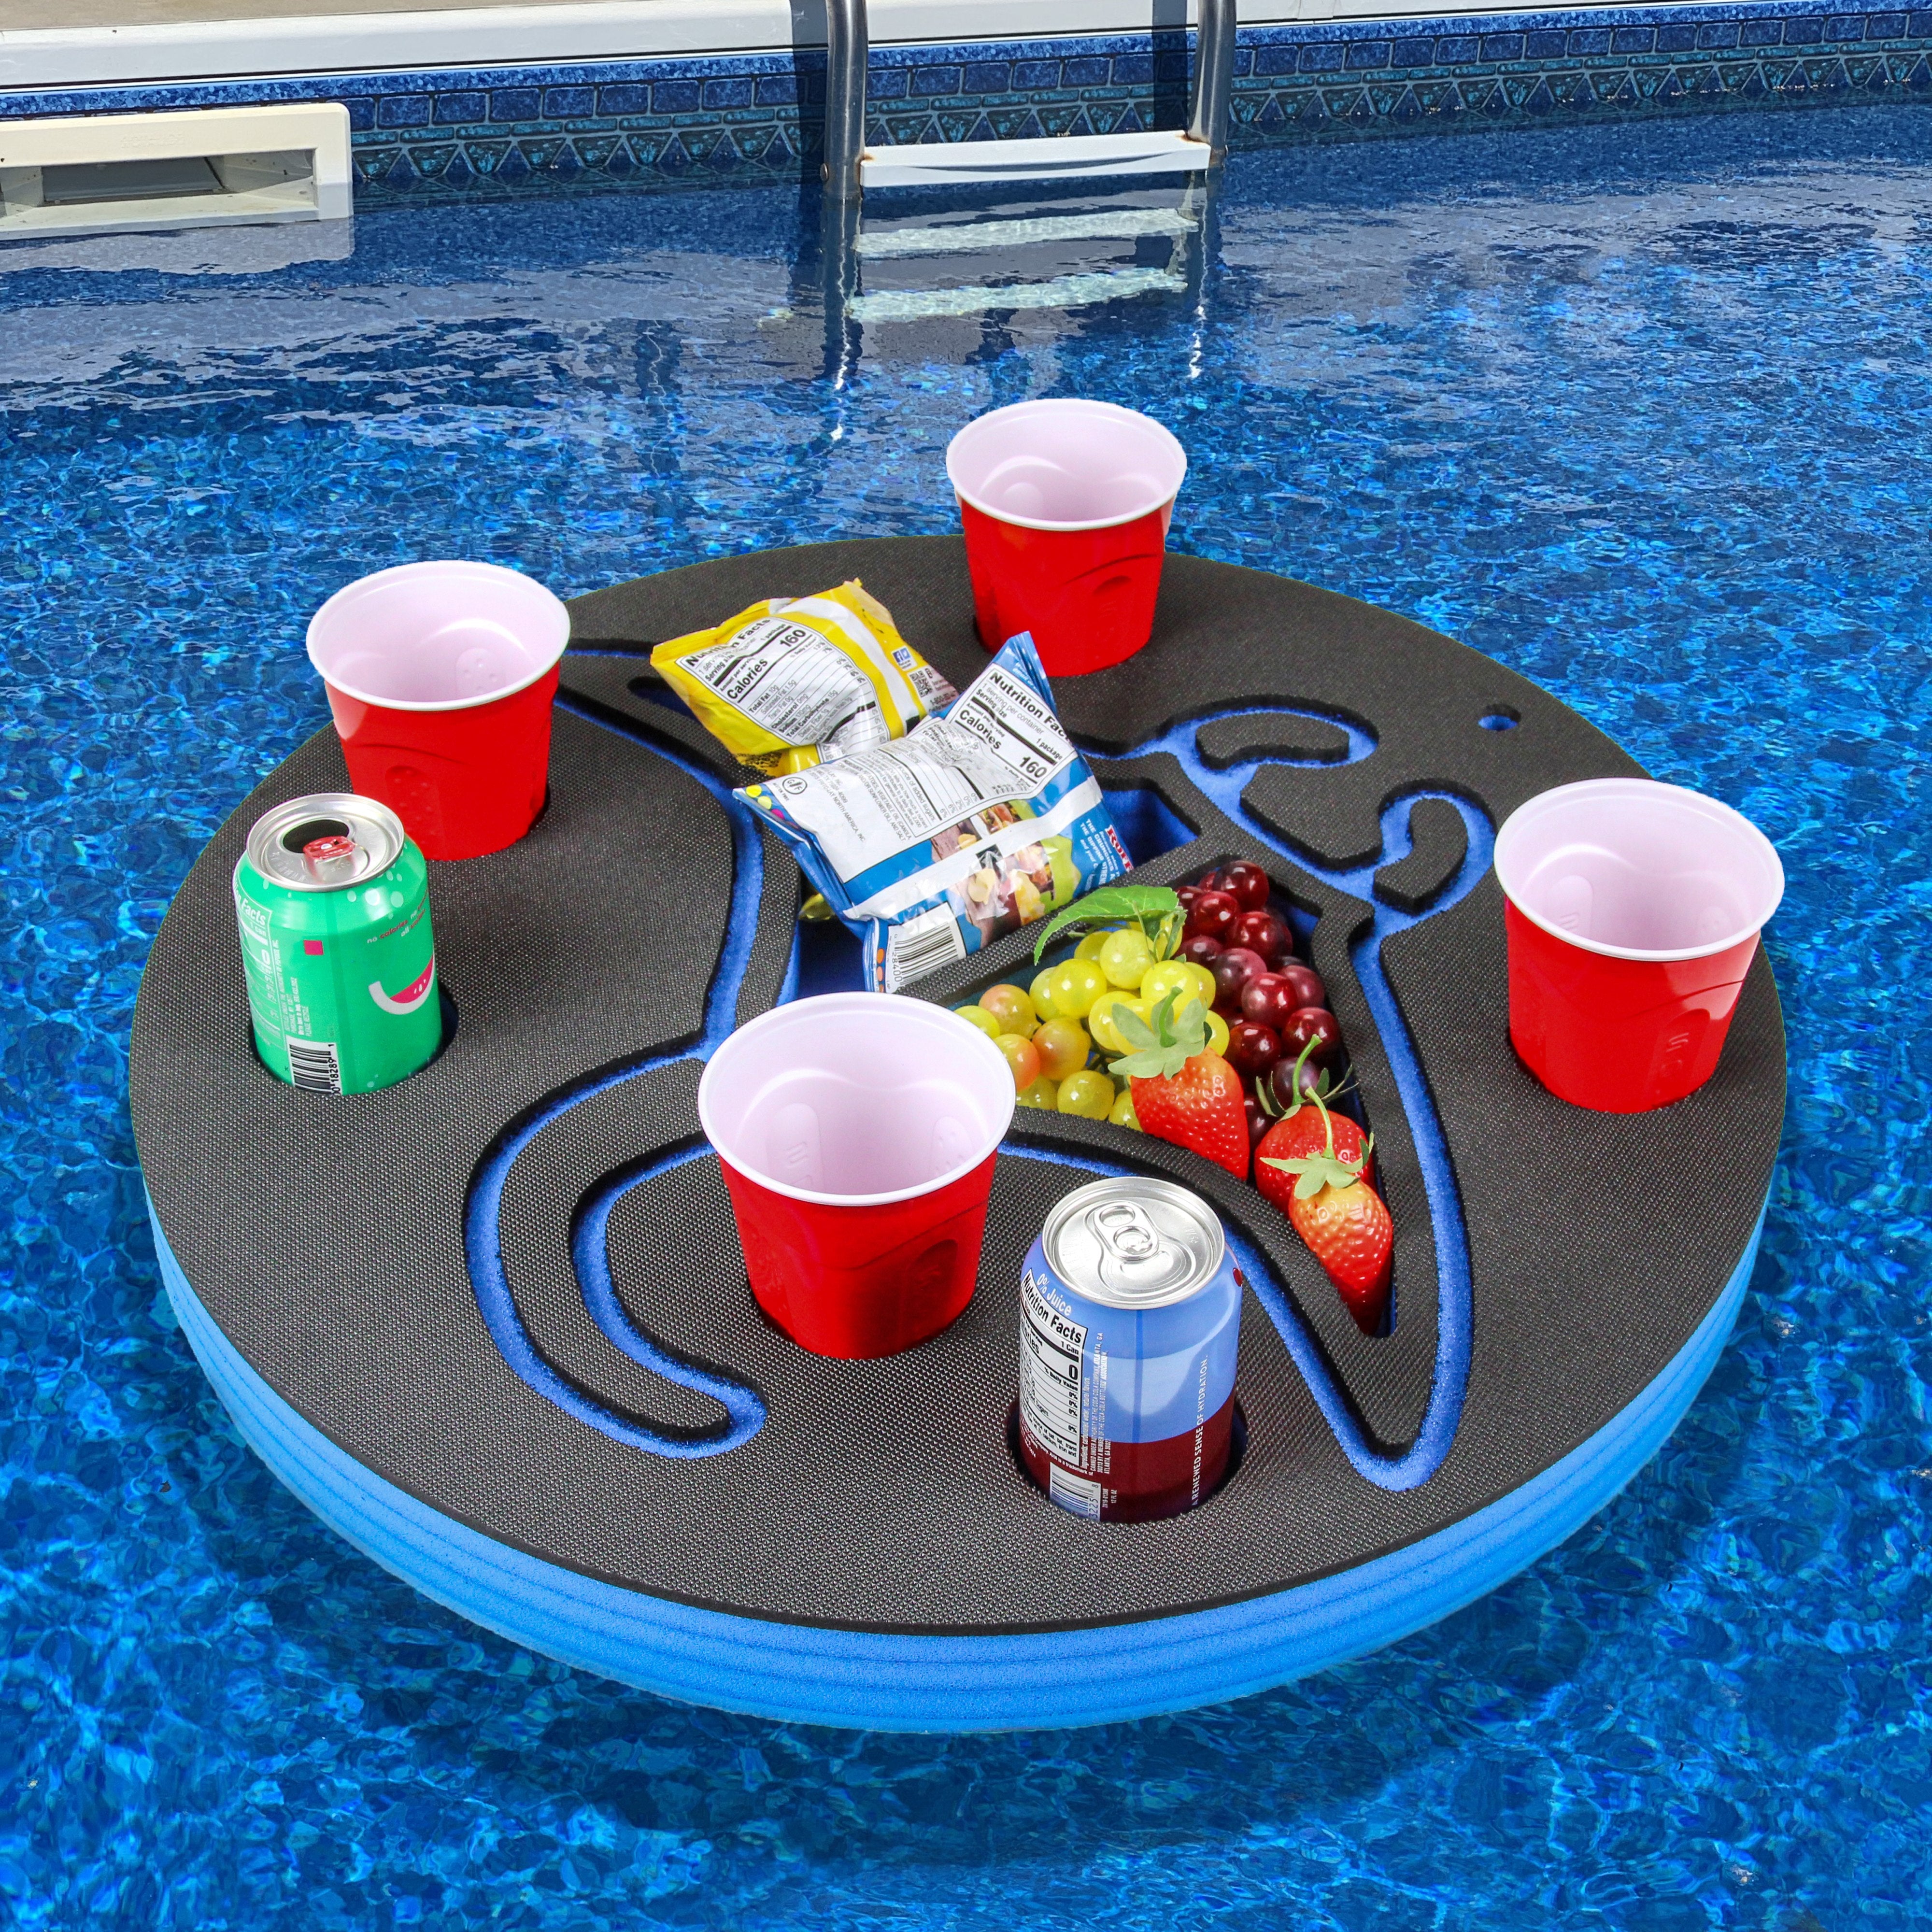 Stingray Manta Shape Drink Holder Refreshment Table Tray PoolBeach Party Float Lounge Durable Foam 8 Compartment UV Resistant Cup Holders 2 Feet